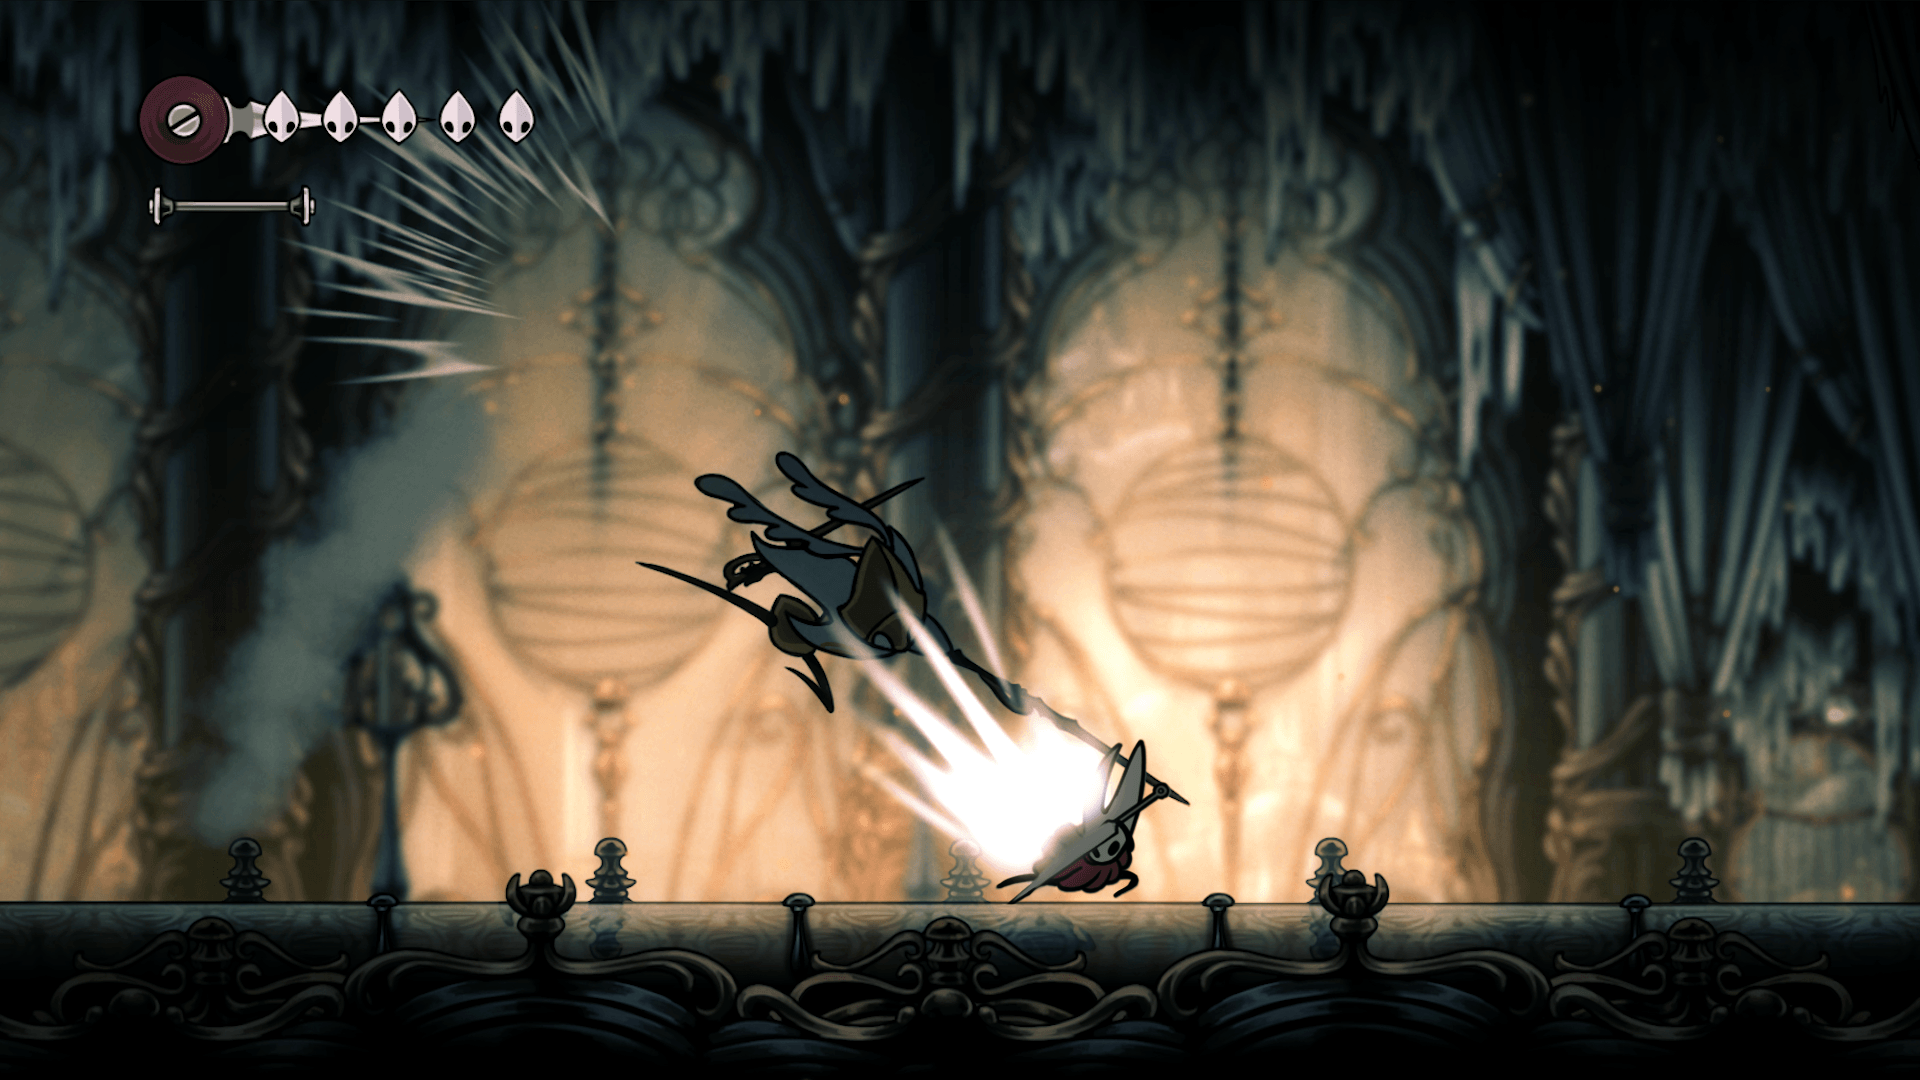 download hollow knight silksong